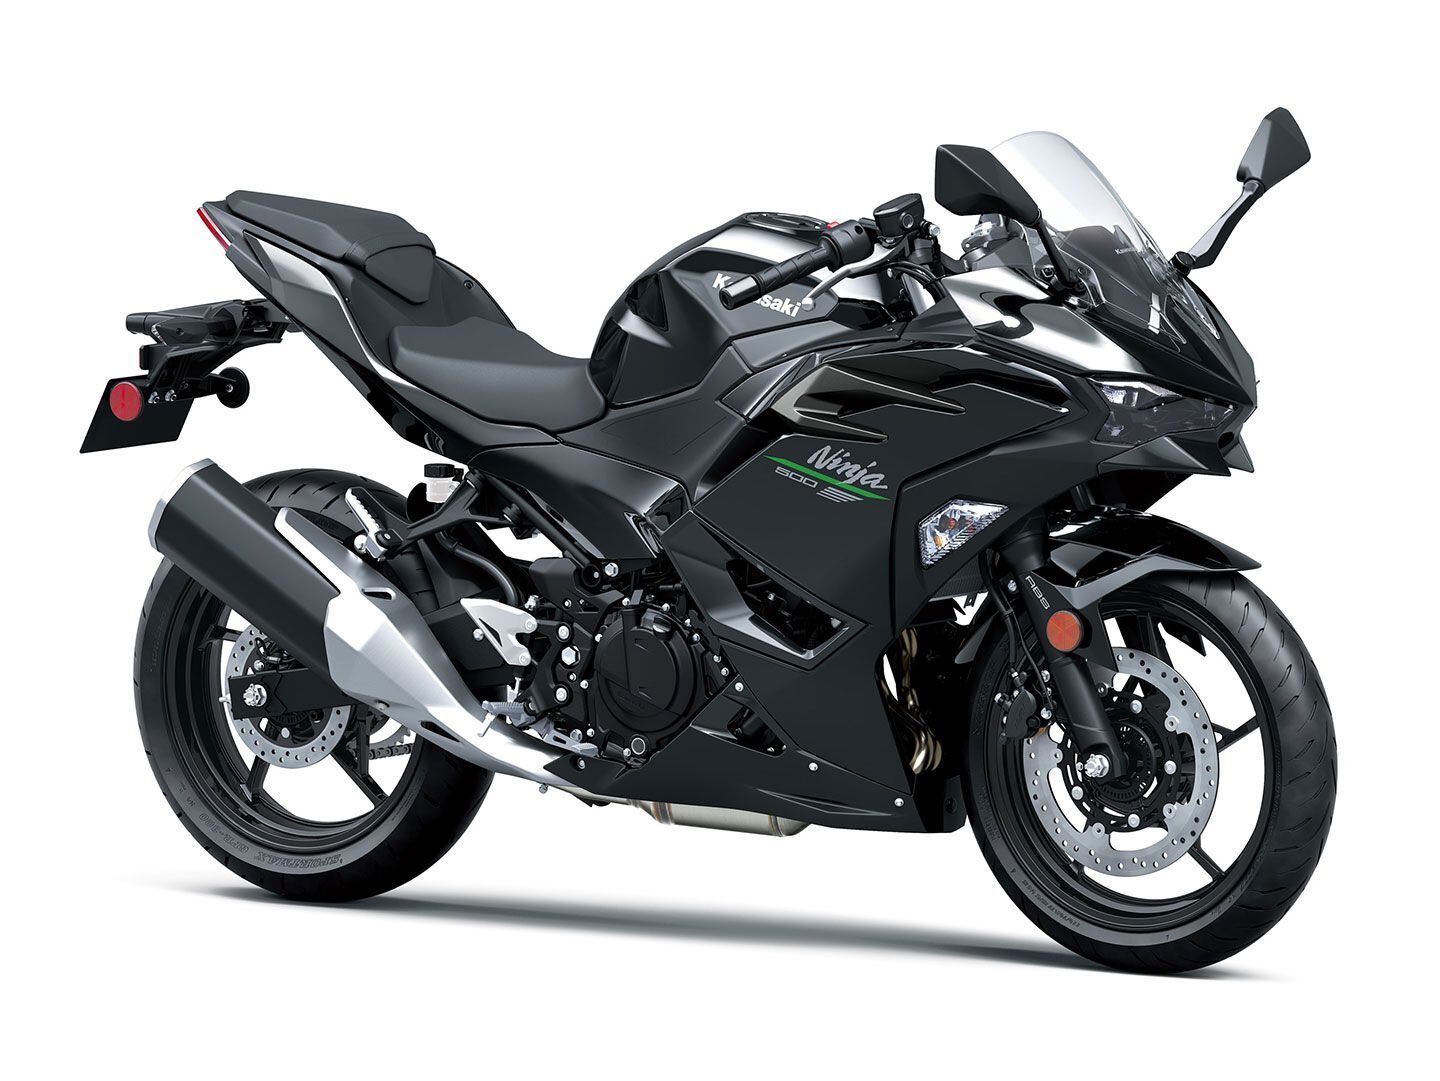 The 2024 Kawasaki Ninja 500 also receives a redesigned headlight and front fairing.